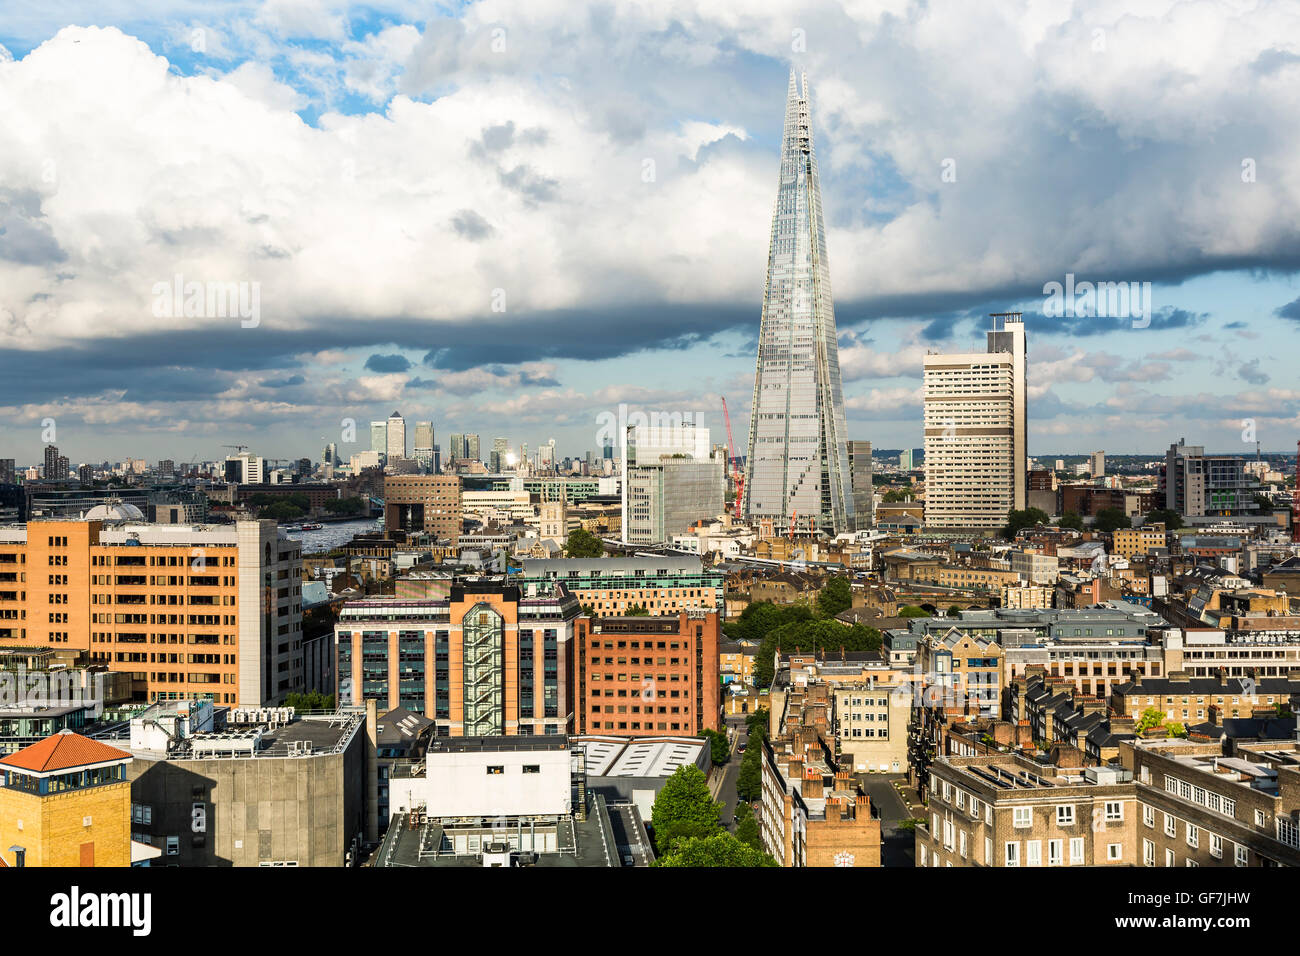 London, England - June 2016. View of  the Shard, the tallest building in London, from the Tate Modern Observation Deck Stock Photo